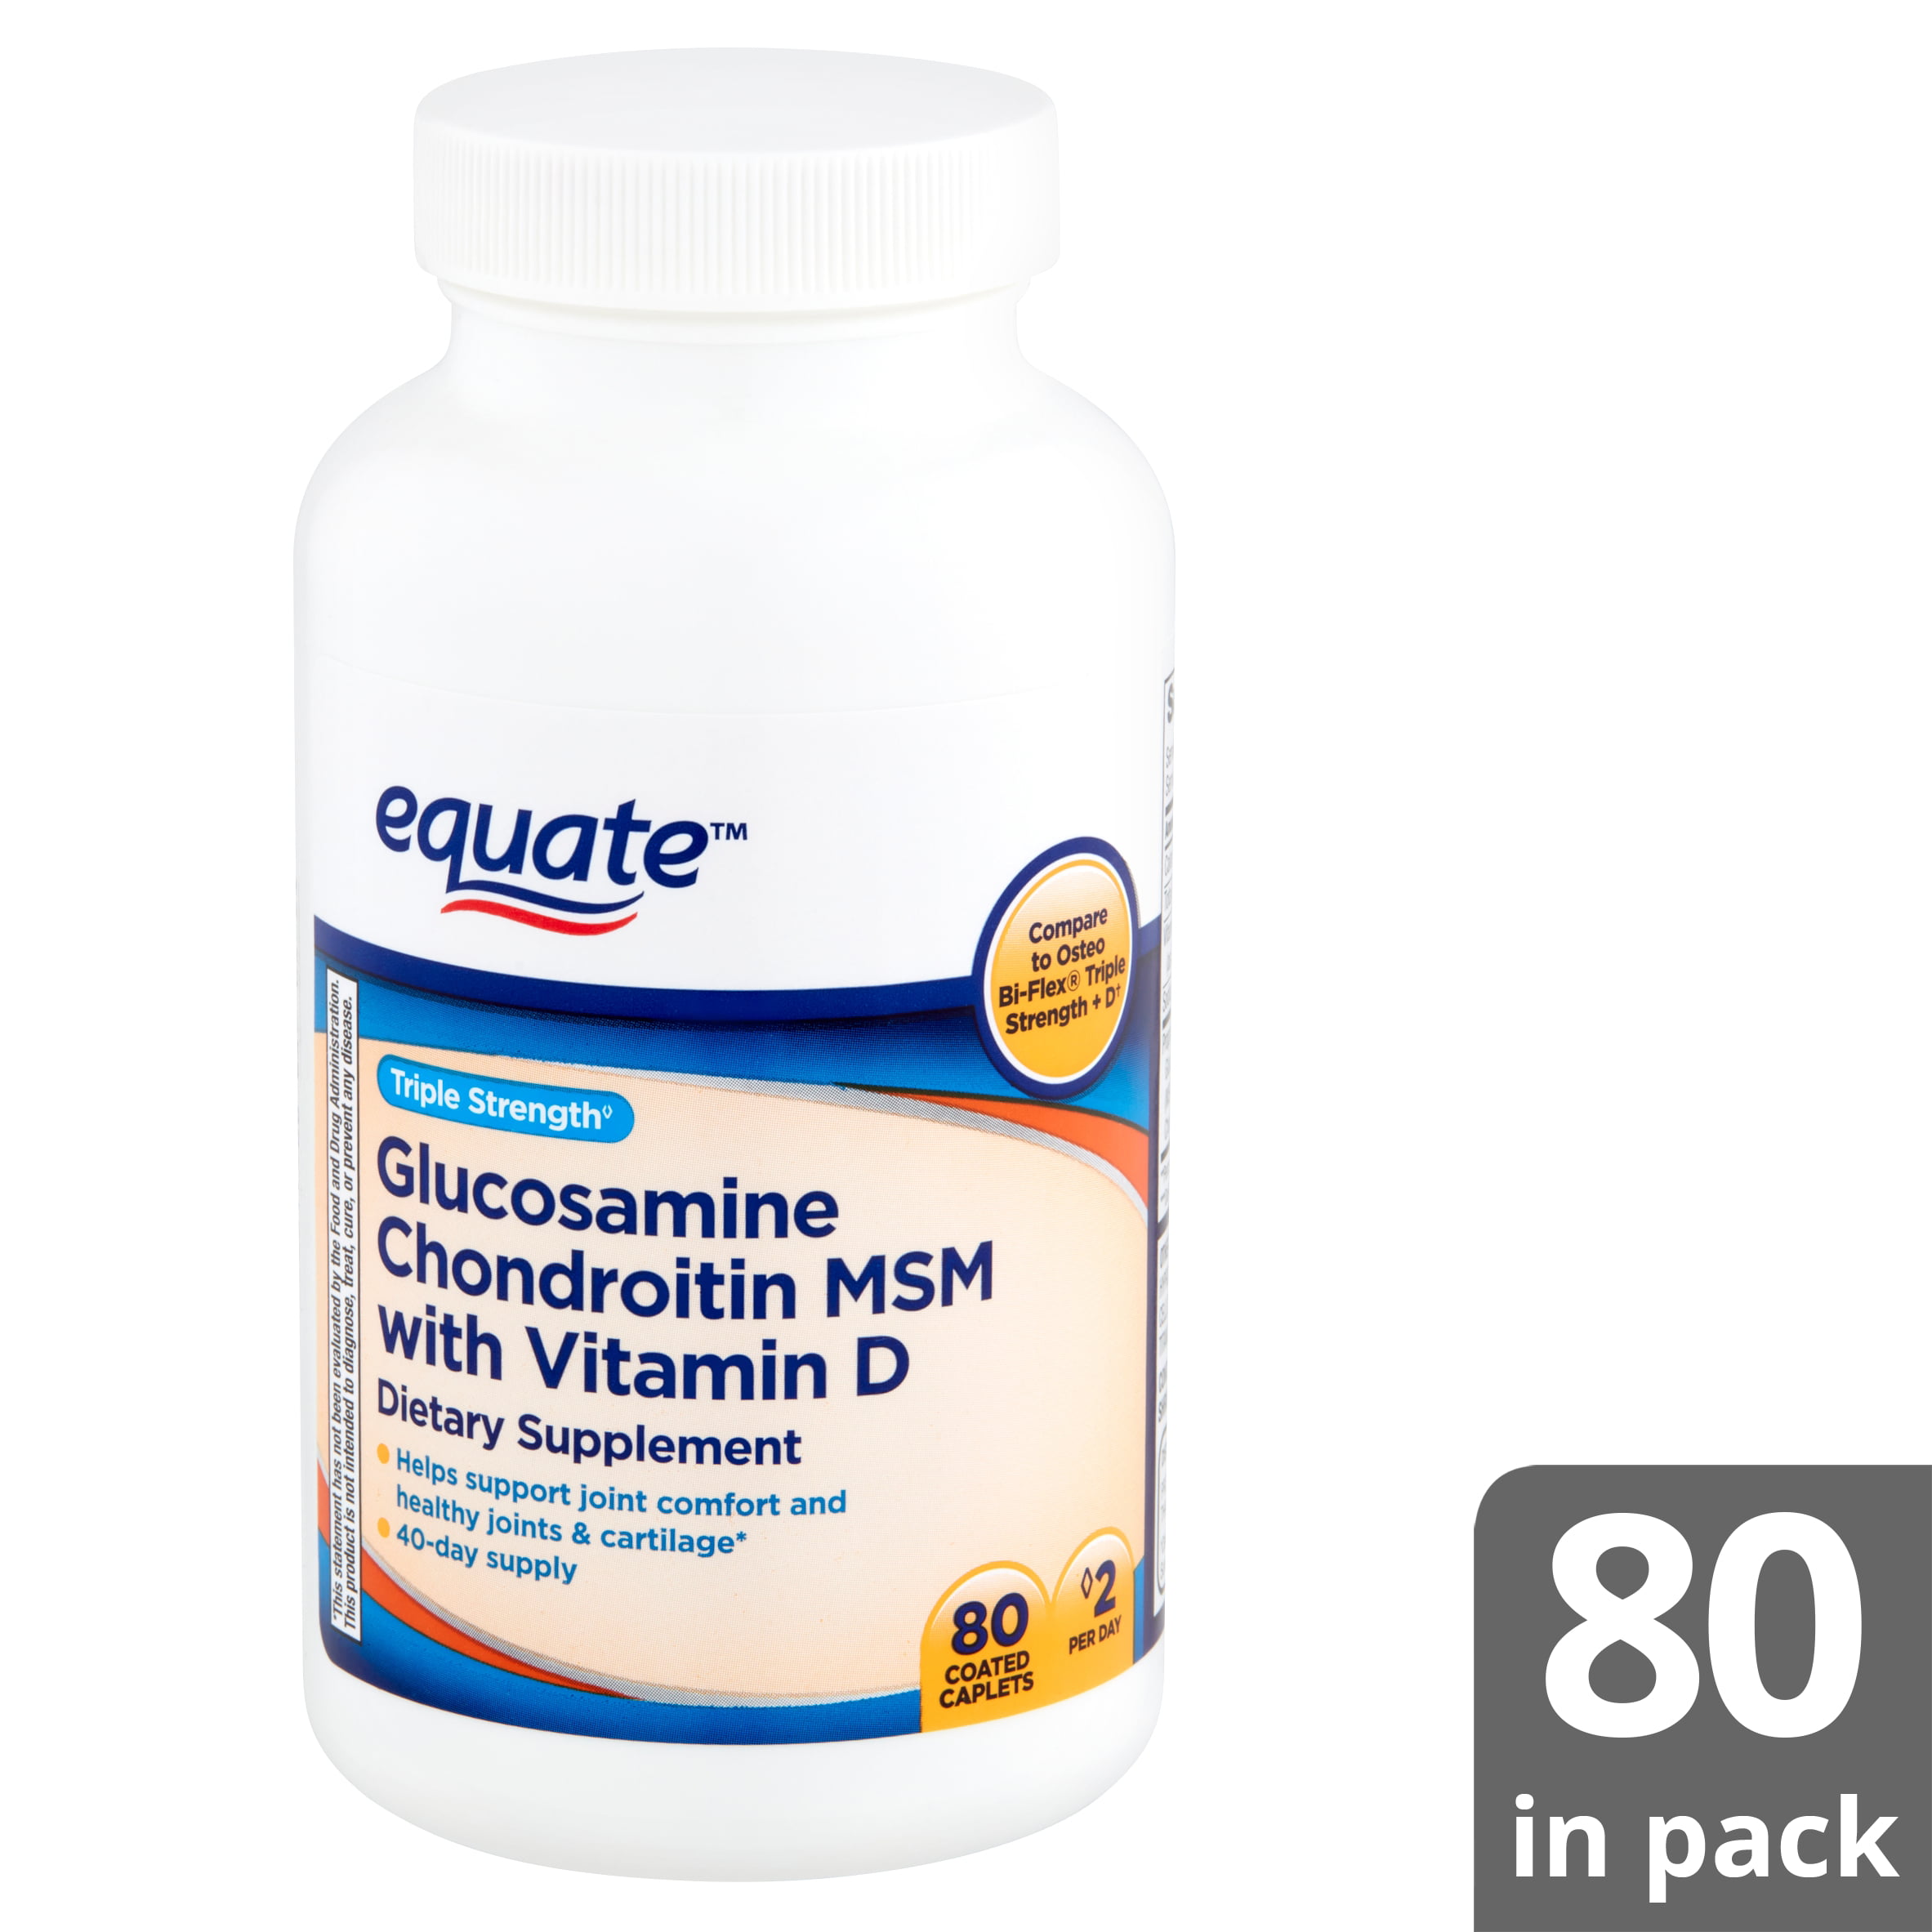 Equate Strength Glucosamine Chondroitin MSM with Vitamin Dietary Supplement, 80 count - Walmart.com